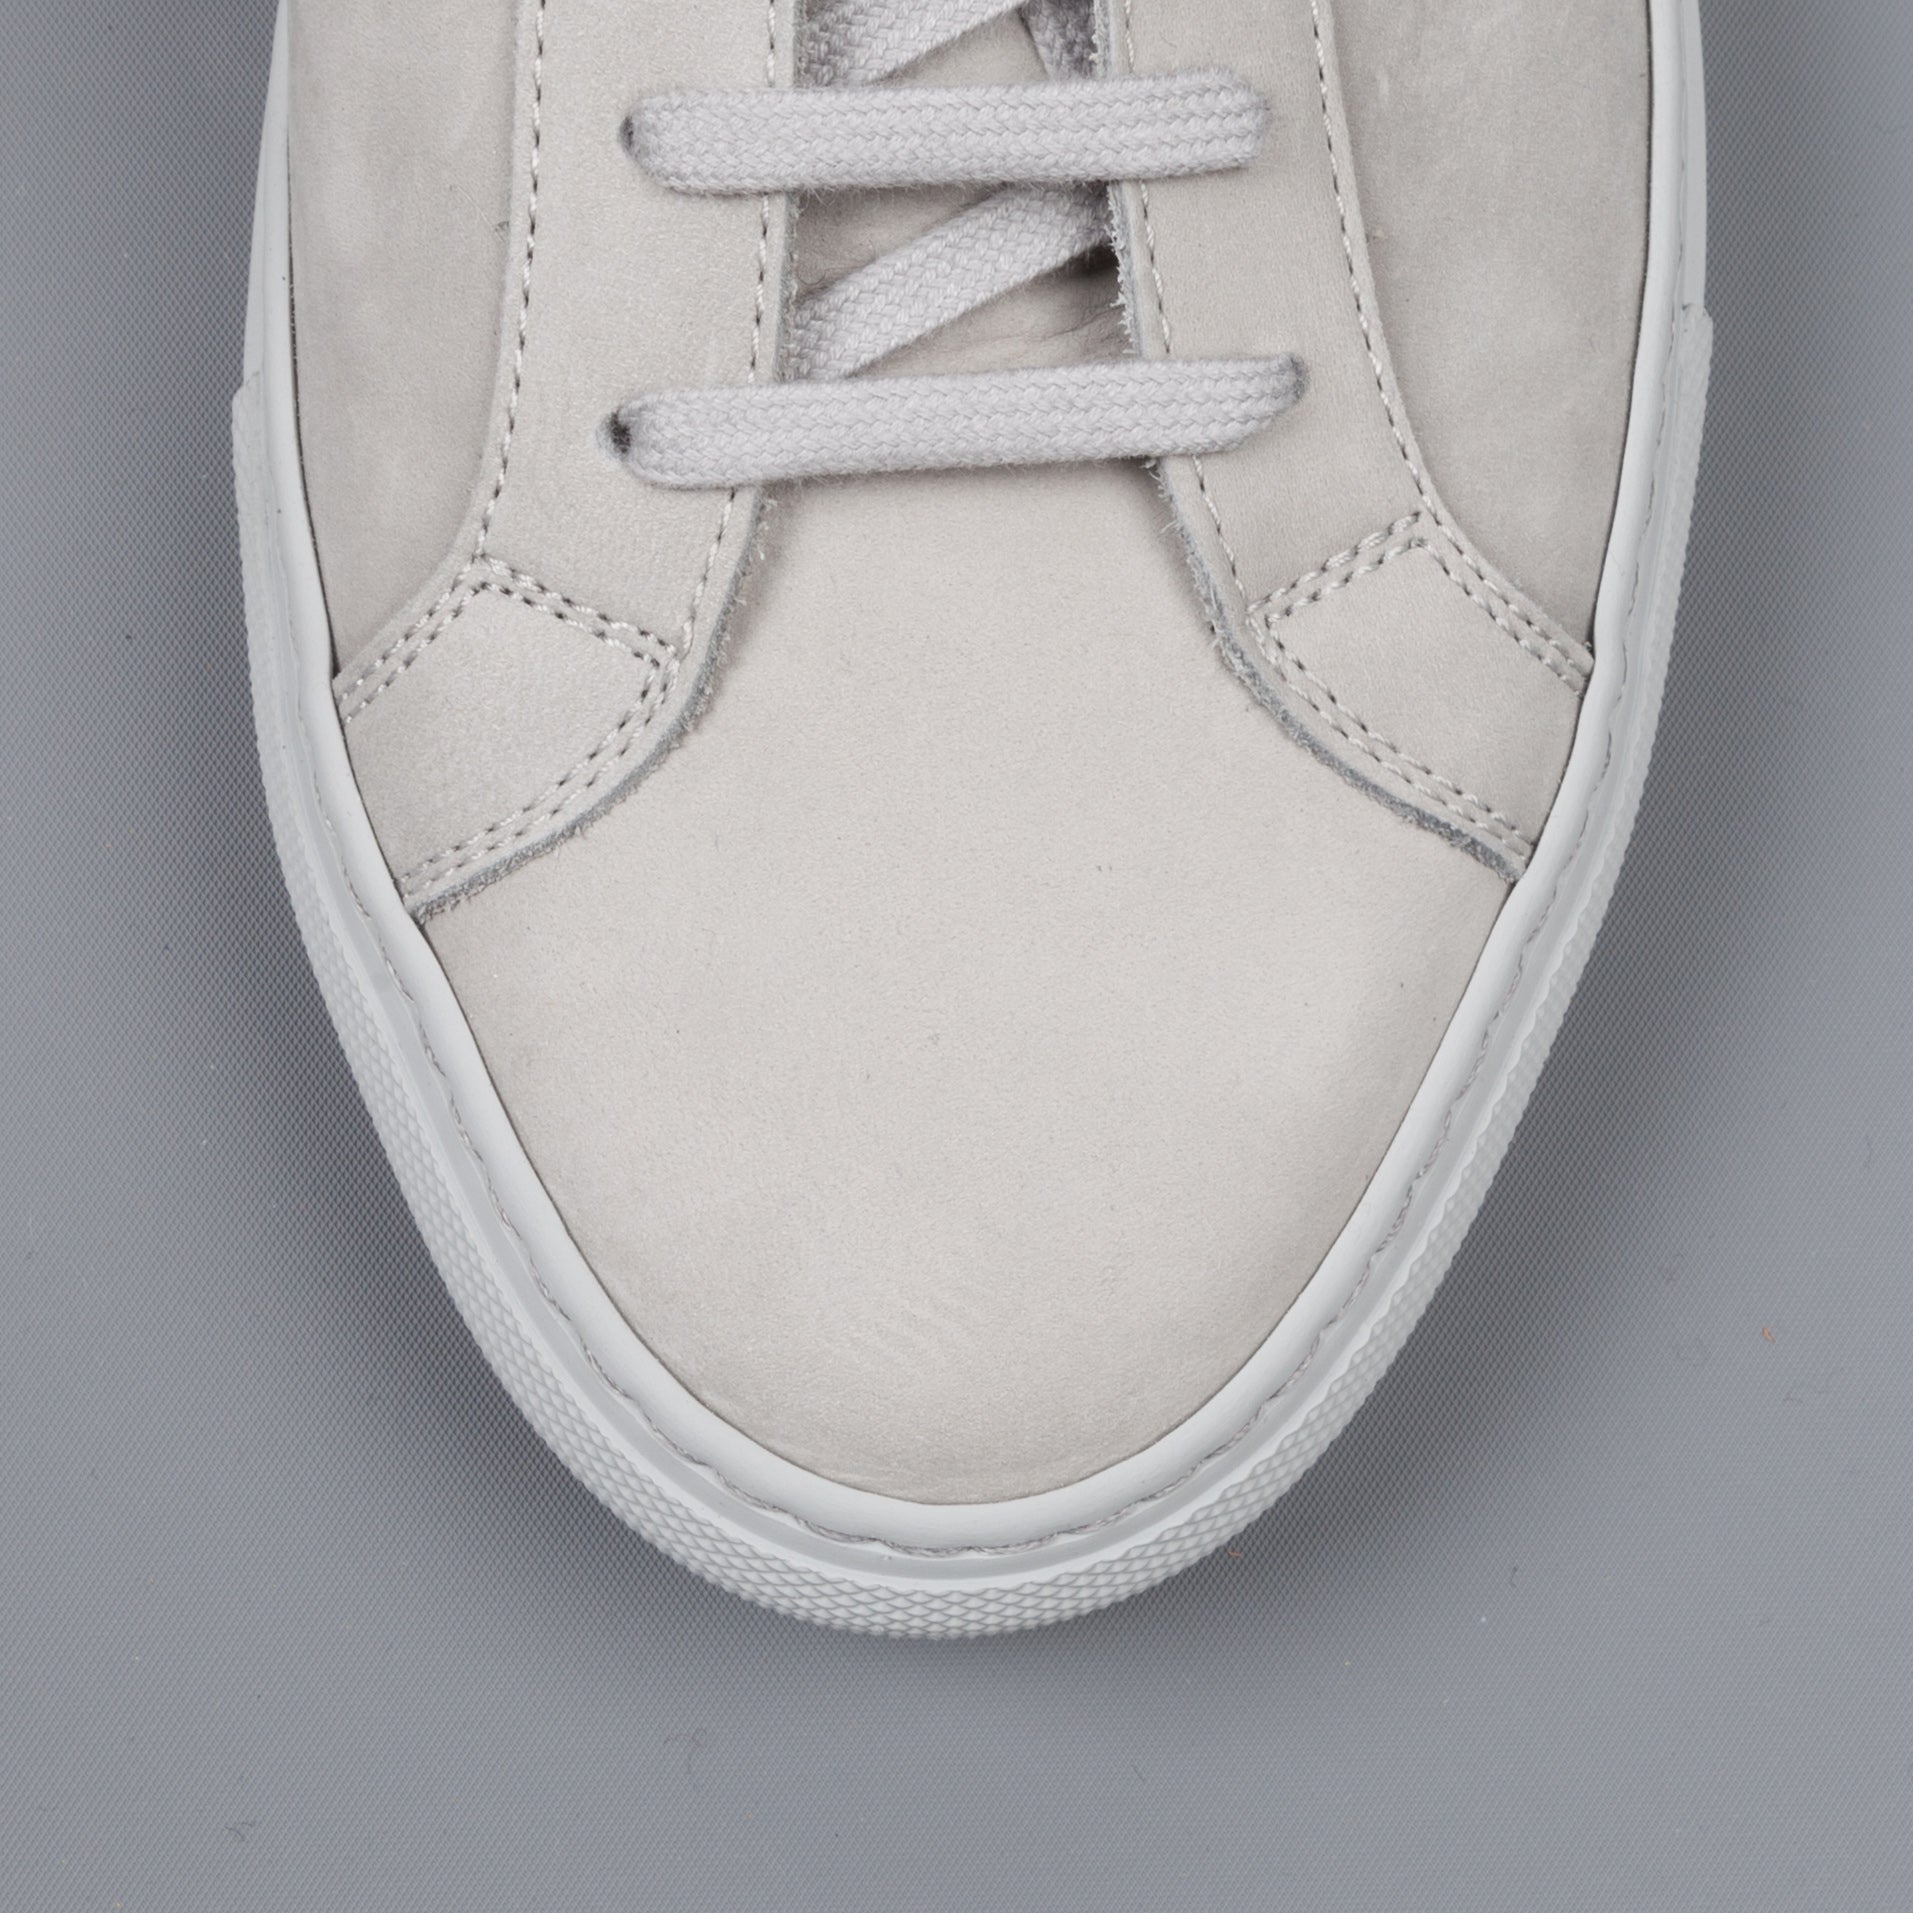 Common Projects Original Achilles Low Nabuck Grey – Frans Boone Store